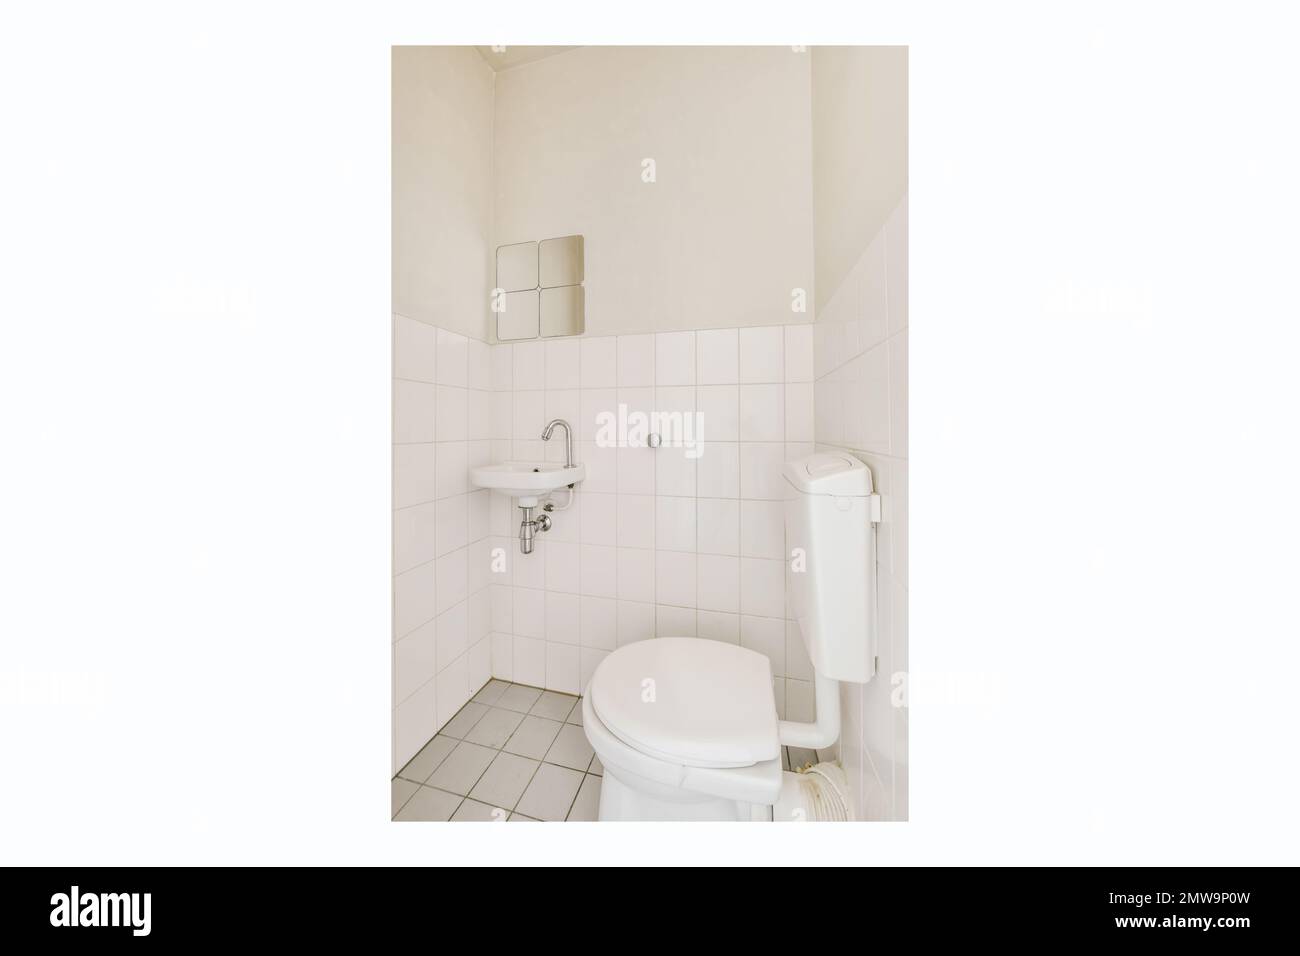 a white toilet in a small bathroom with tile flooring and wall - to - wall tiles on the walls Stock Photo